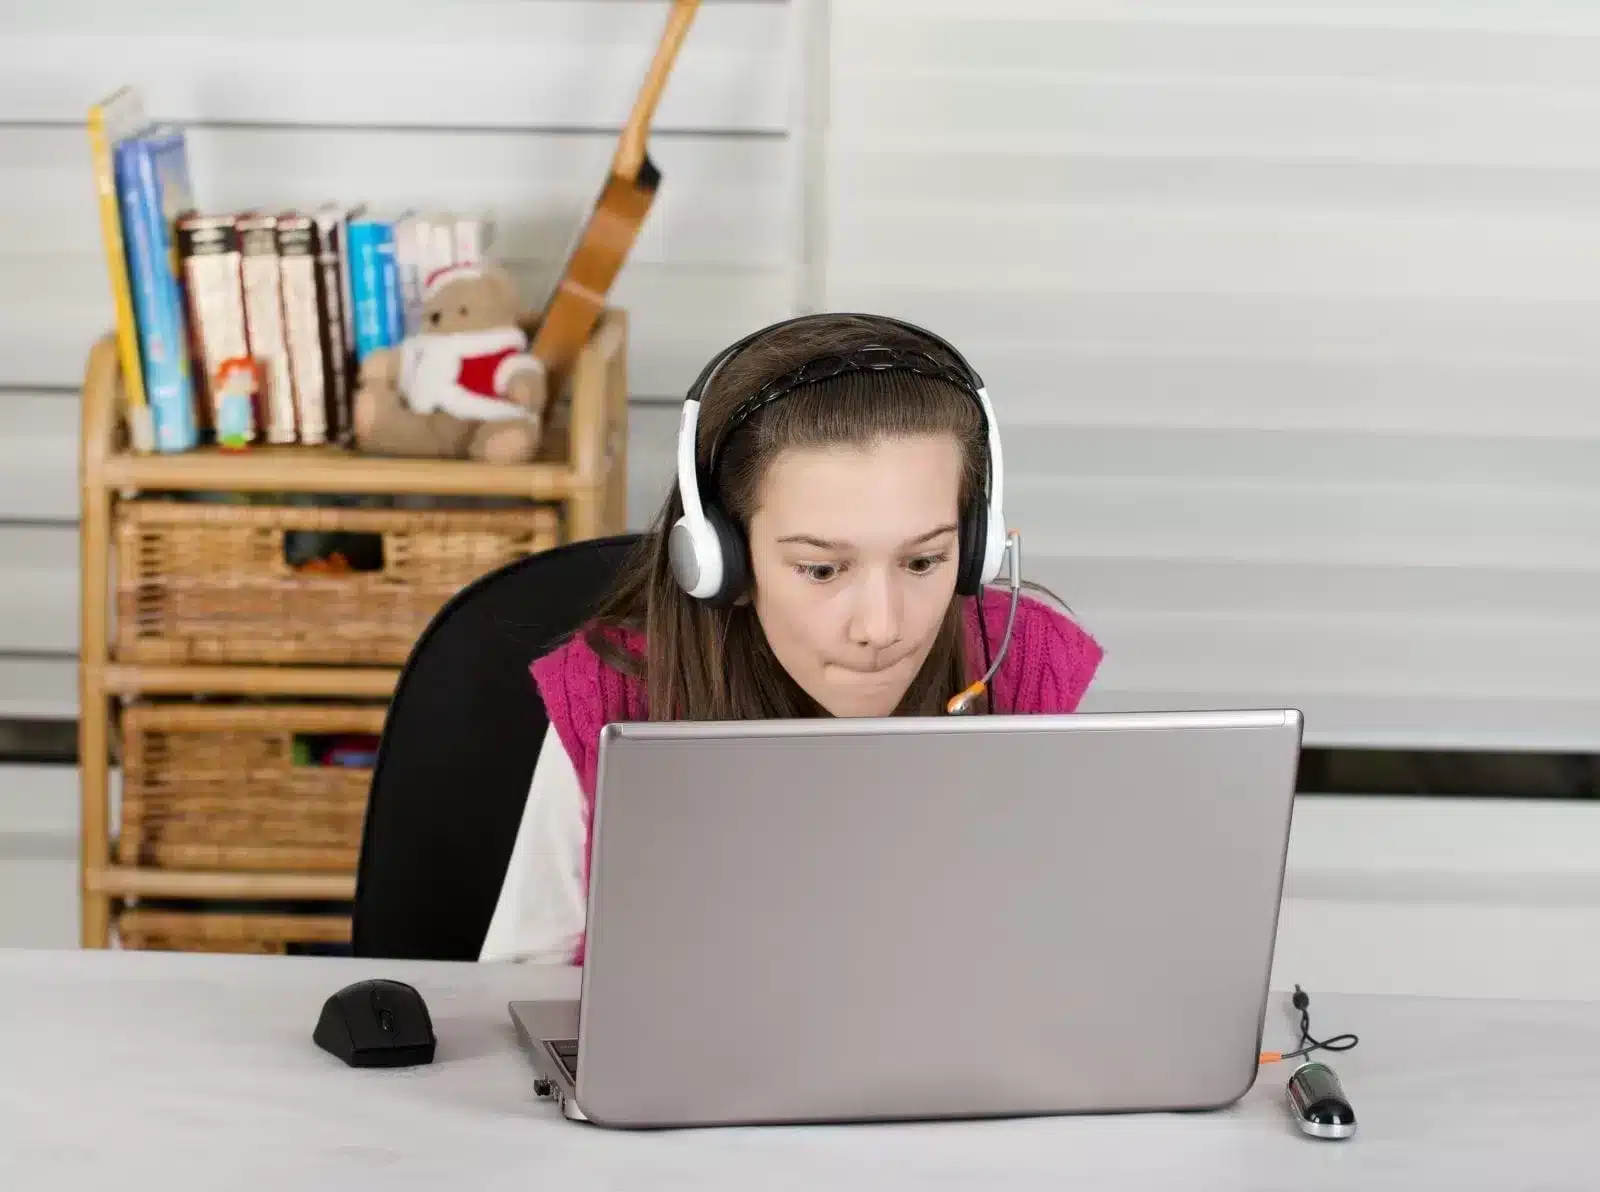 Girl using a laptop and using headset